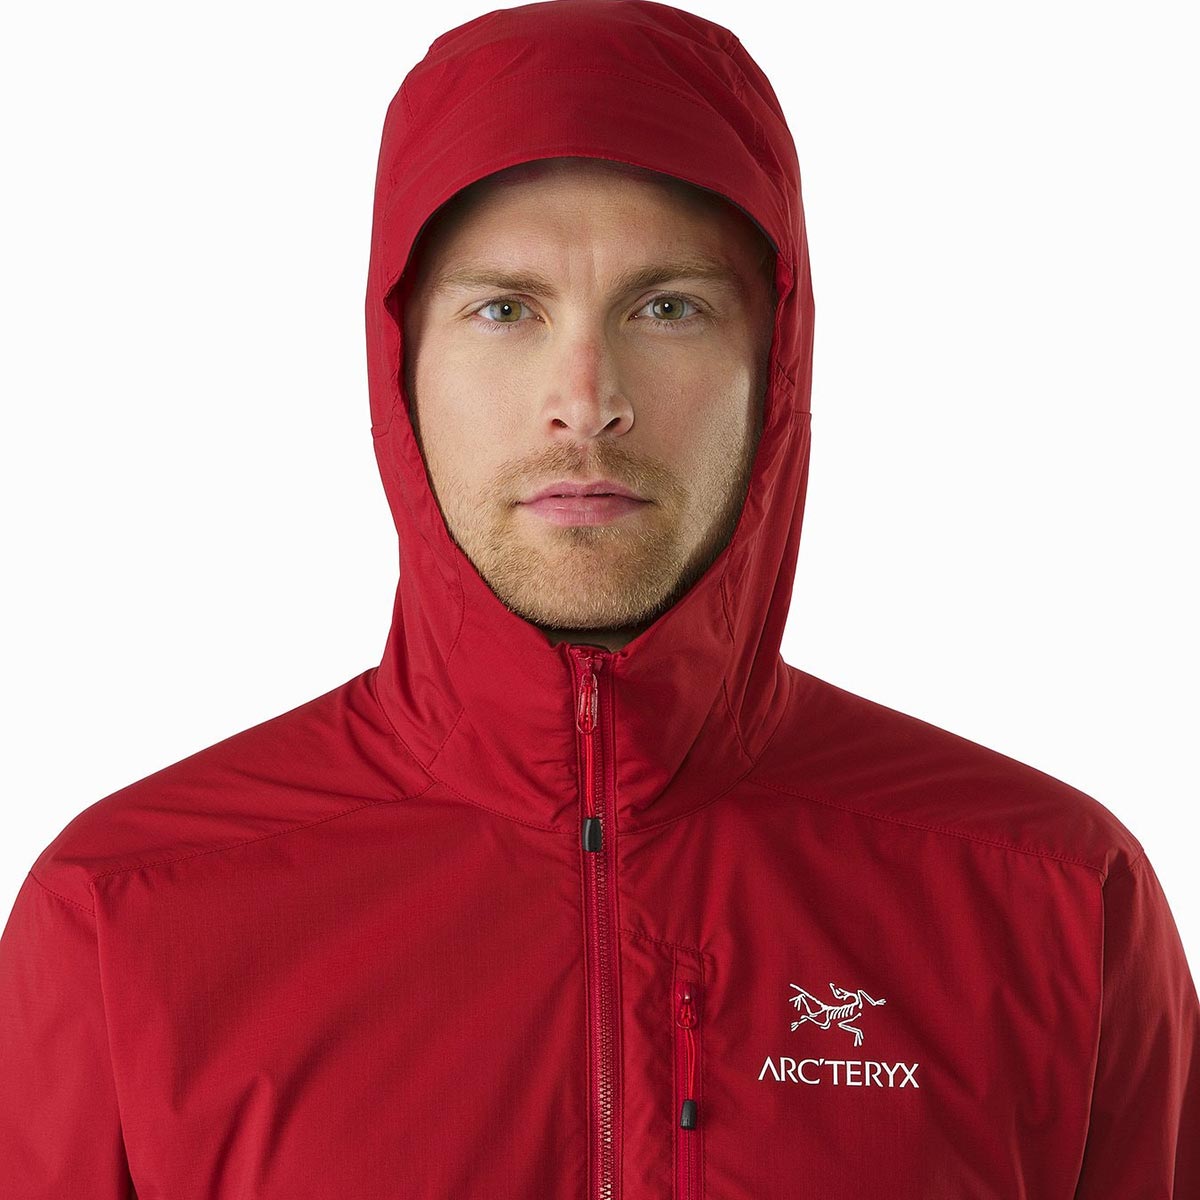 Arc'teryx Squamish Hoody, men's, discontinued Fall 2018 colors (free